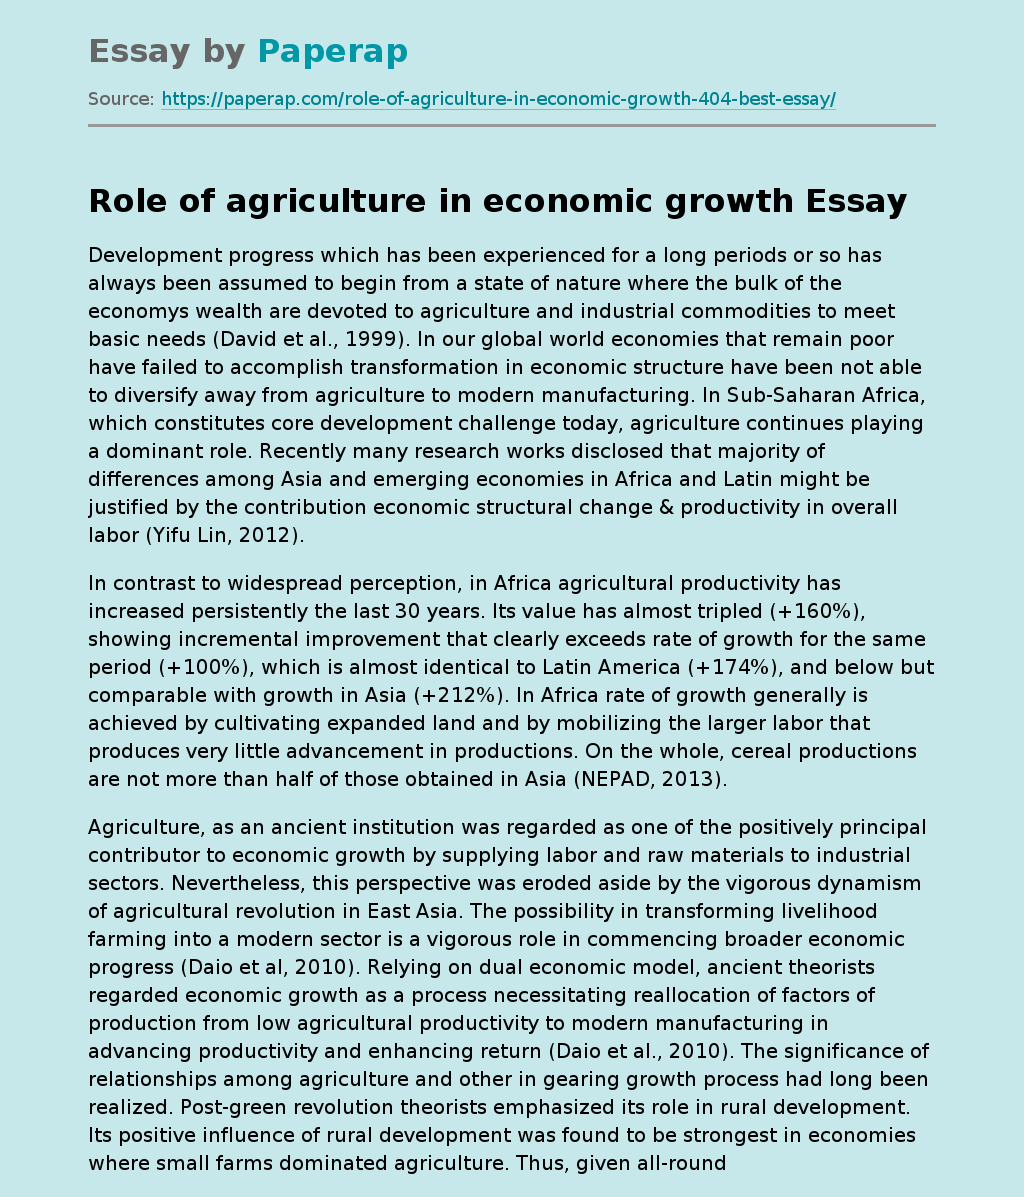 Role of Agriculture in Economic Growth